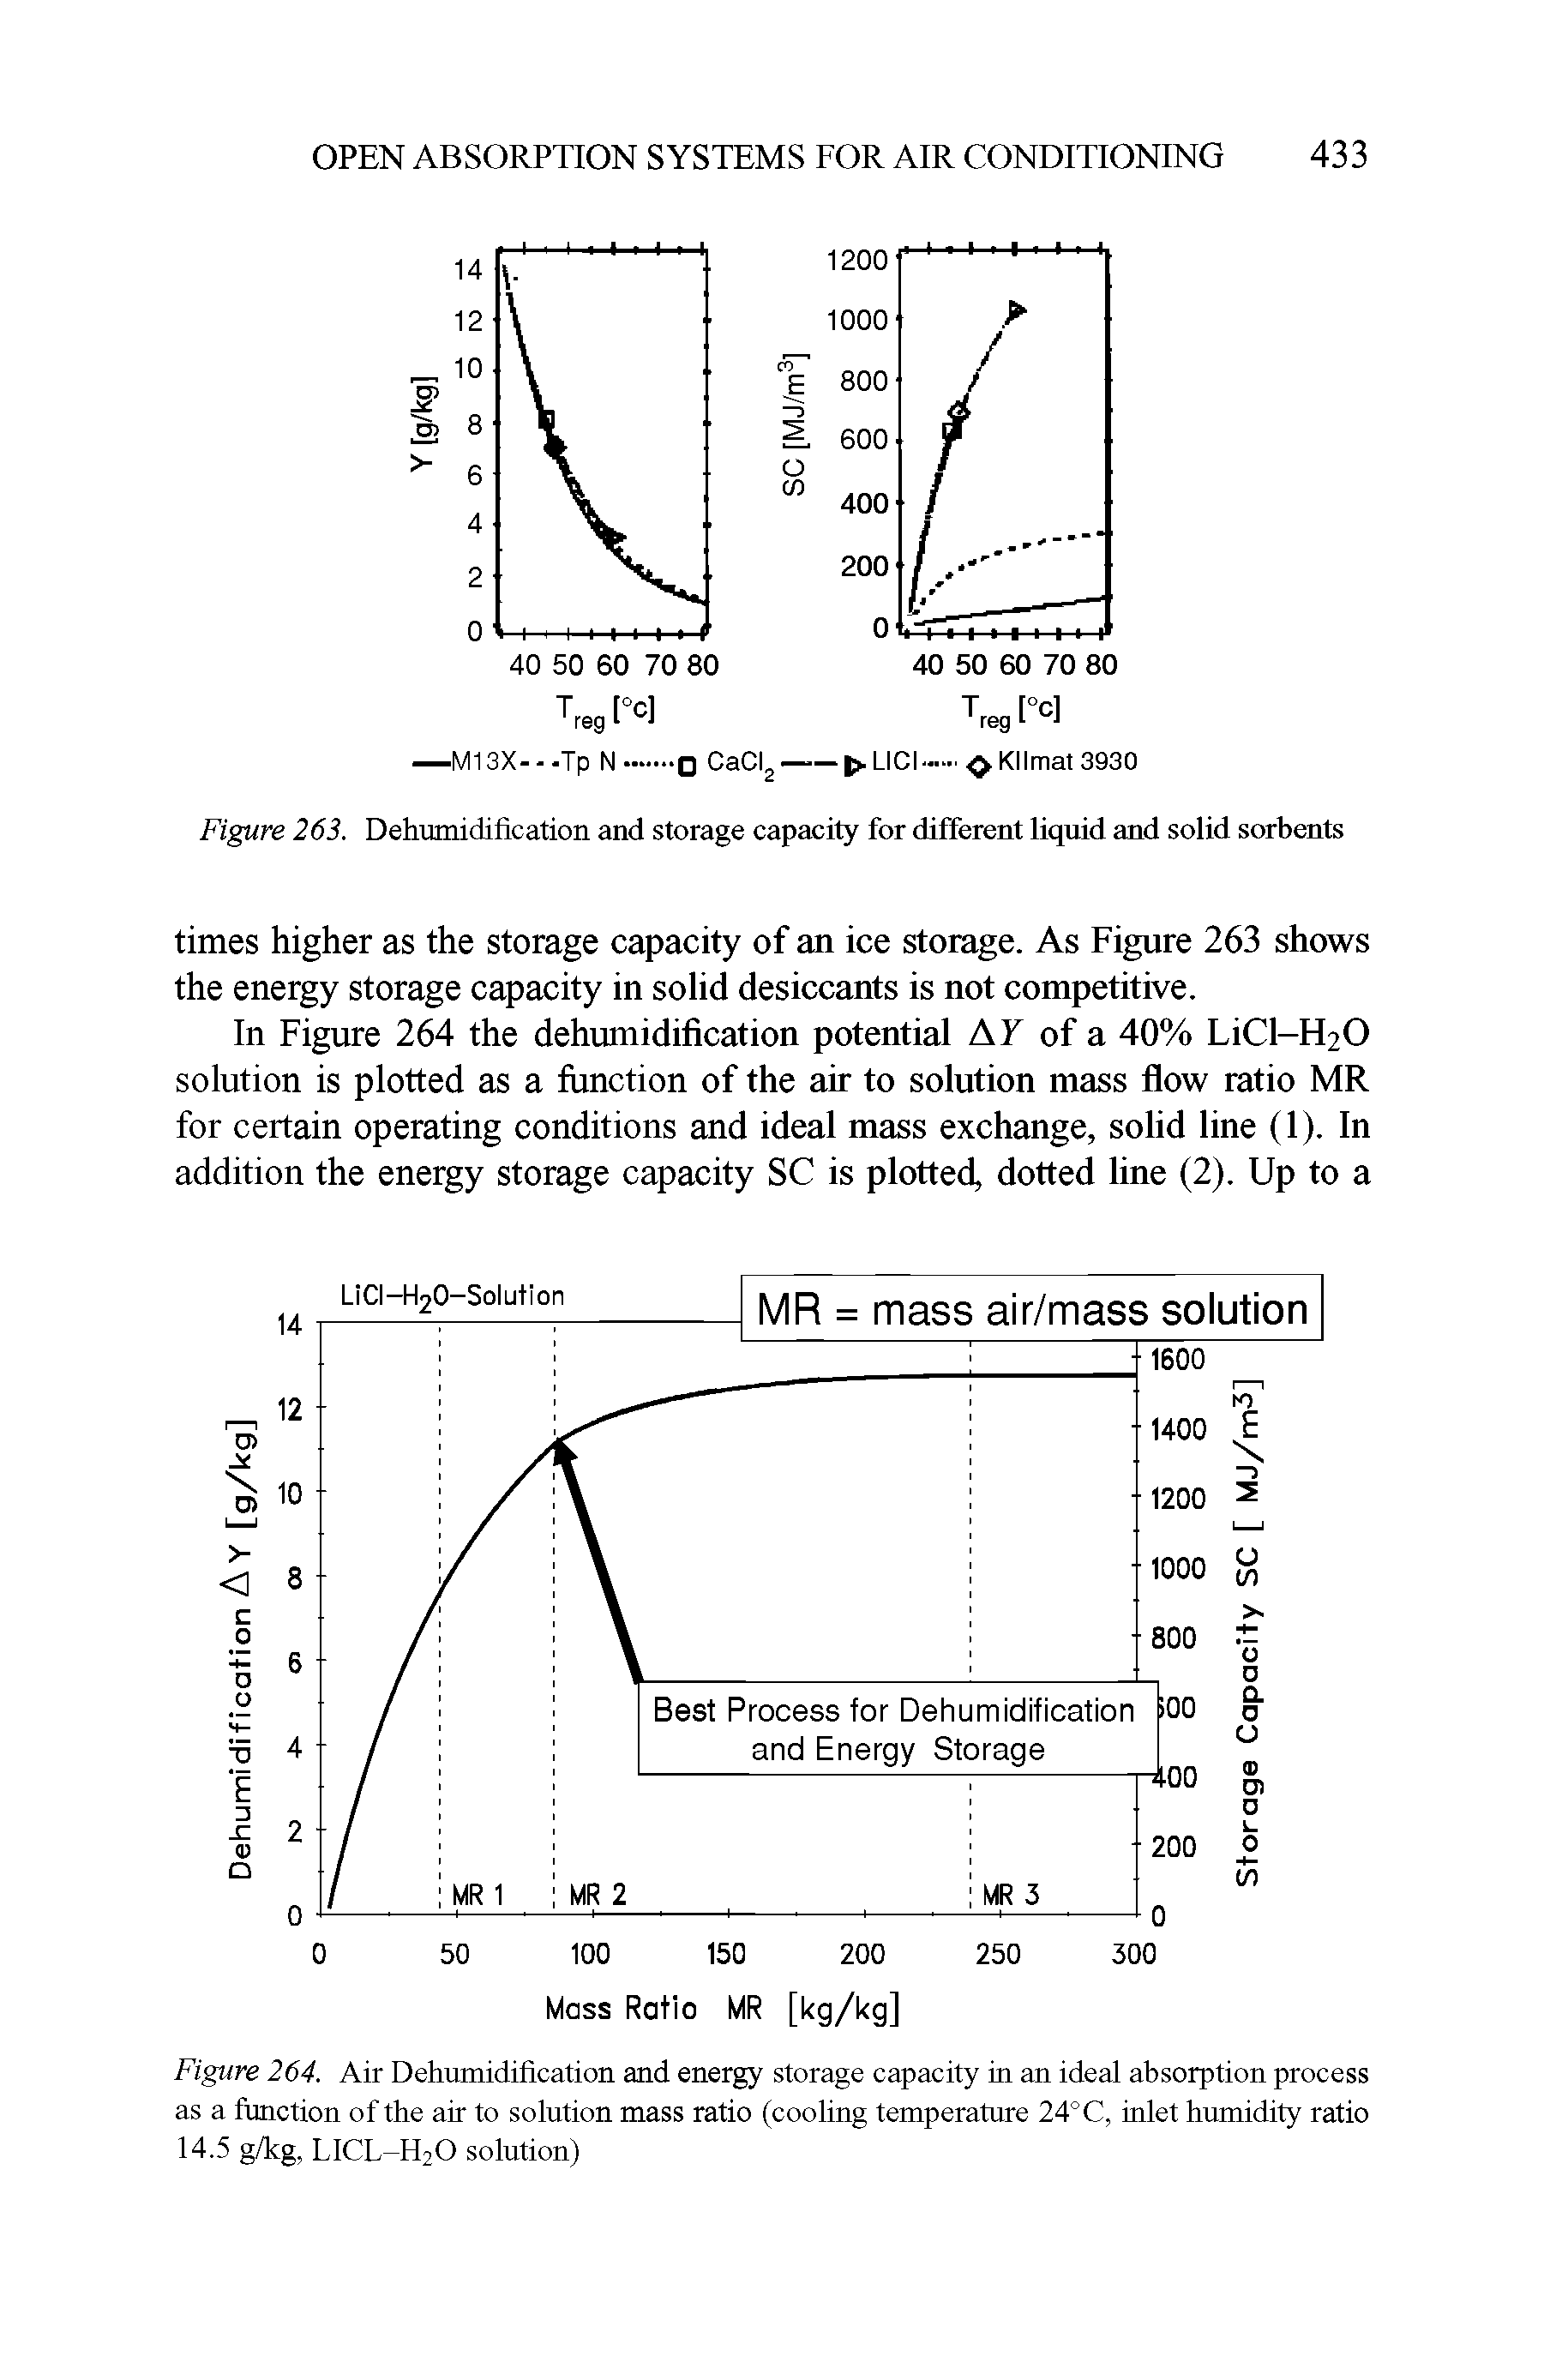 Figure 264. Air Dehumidification and energy storage capacity in an ideal absorption process as a function of the air to solution mass ratio (cooling temperature 24°C, inlet humidity ratio 14.5 g/kg, LICL-H20 solution)...